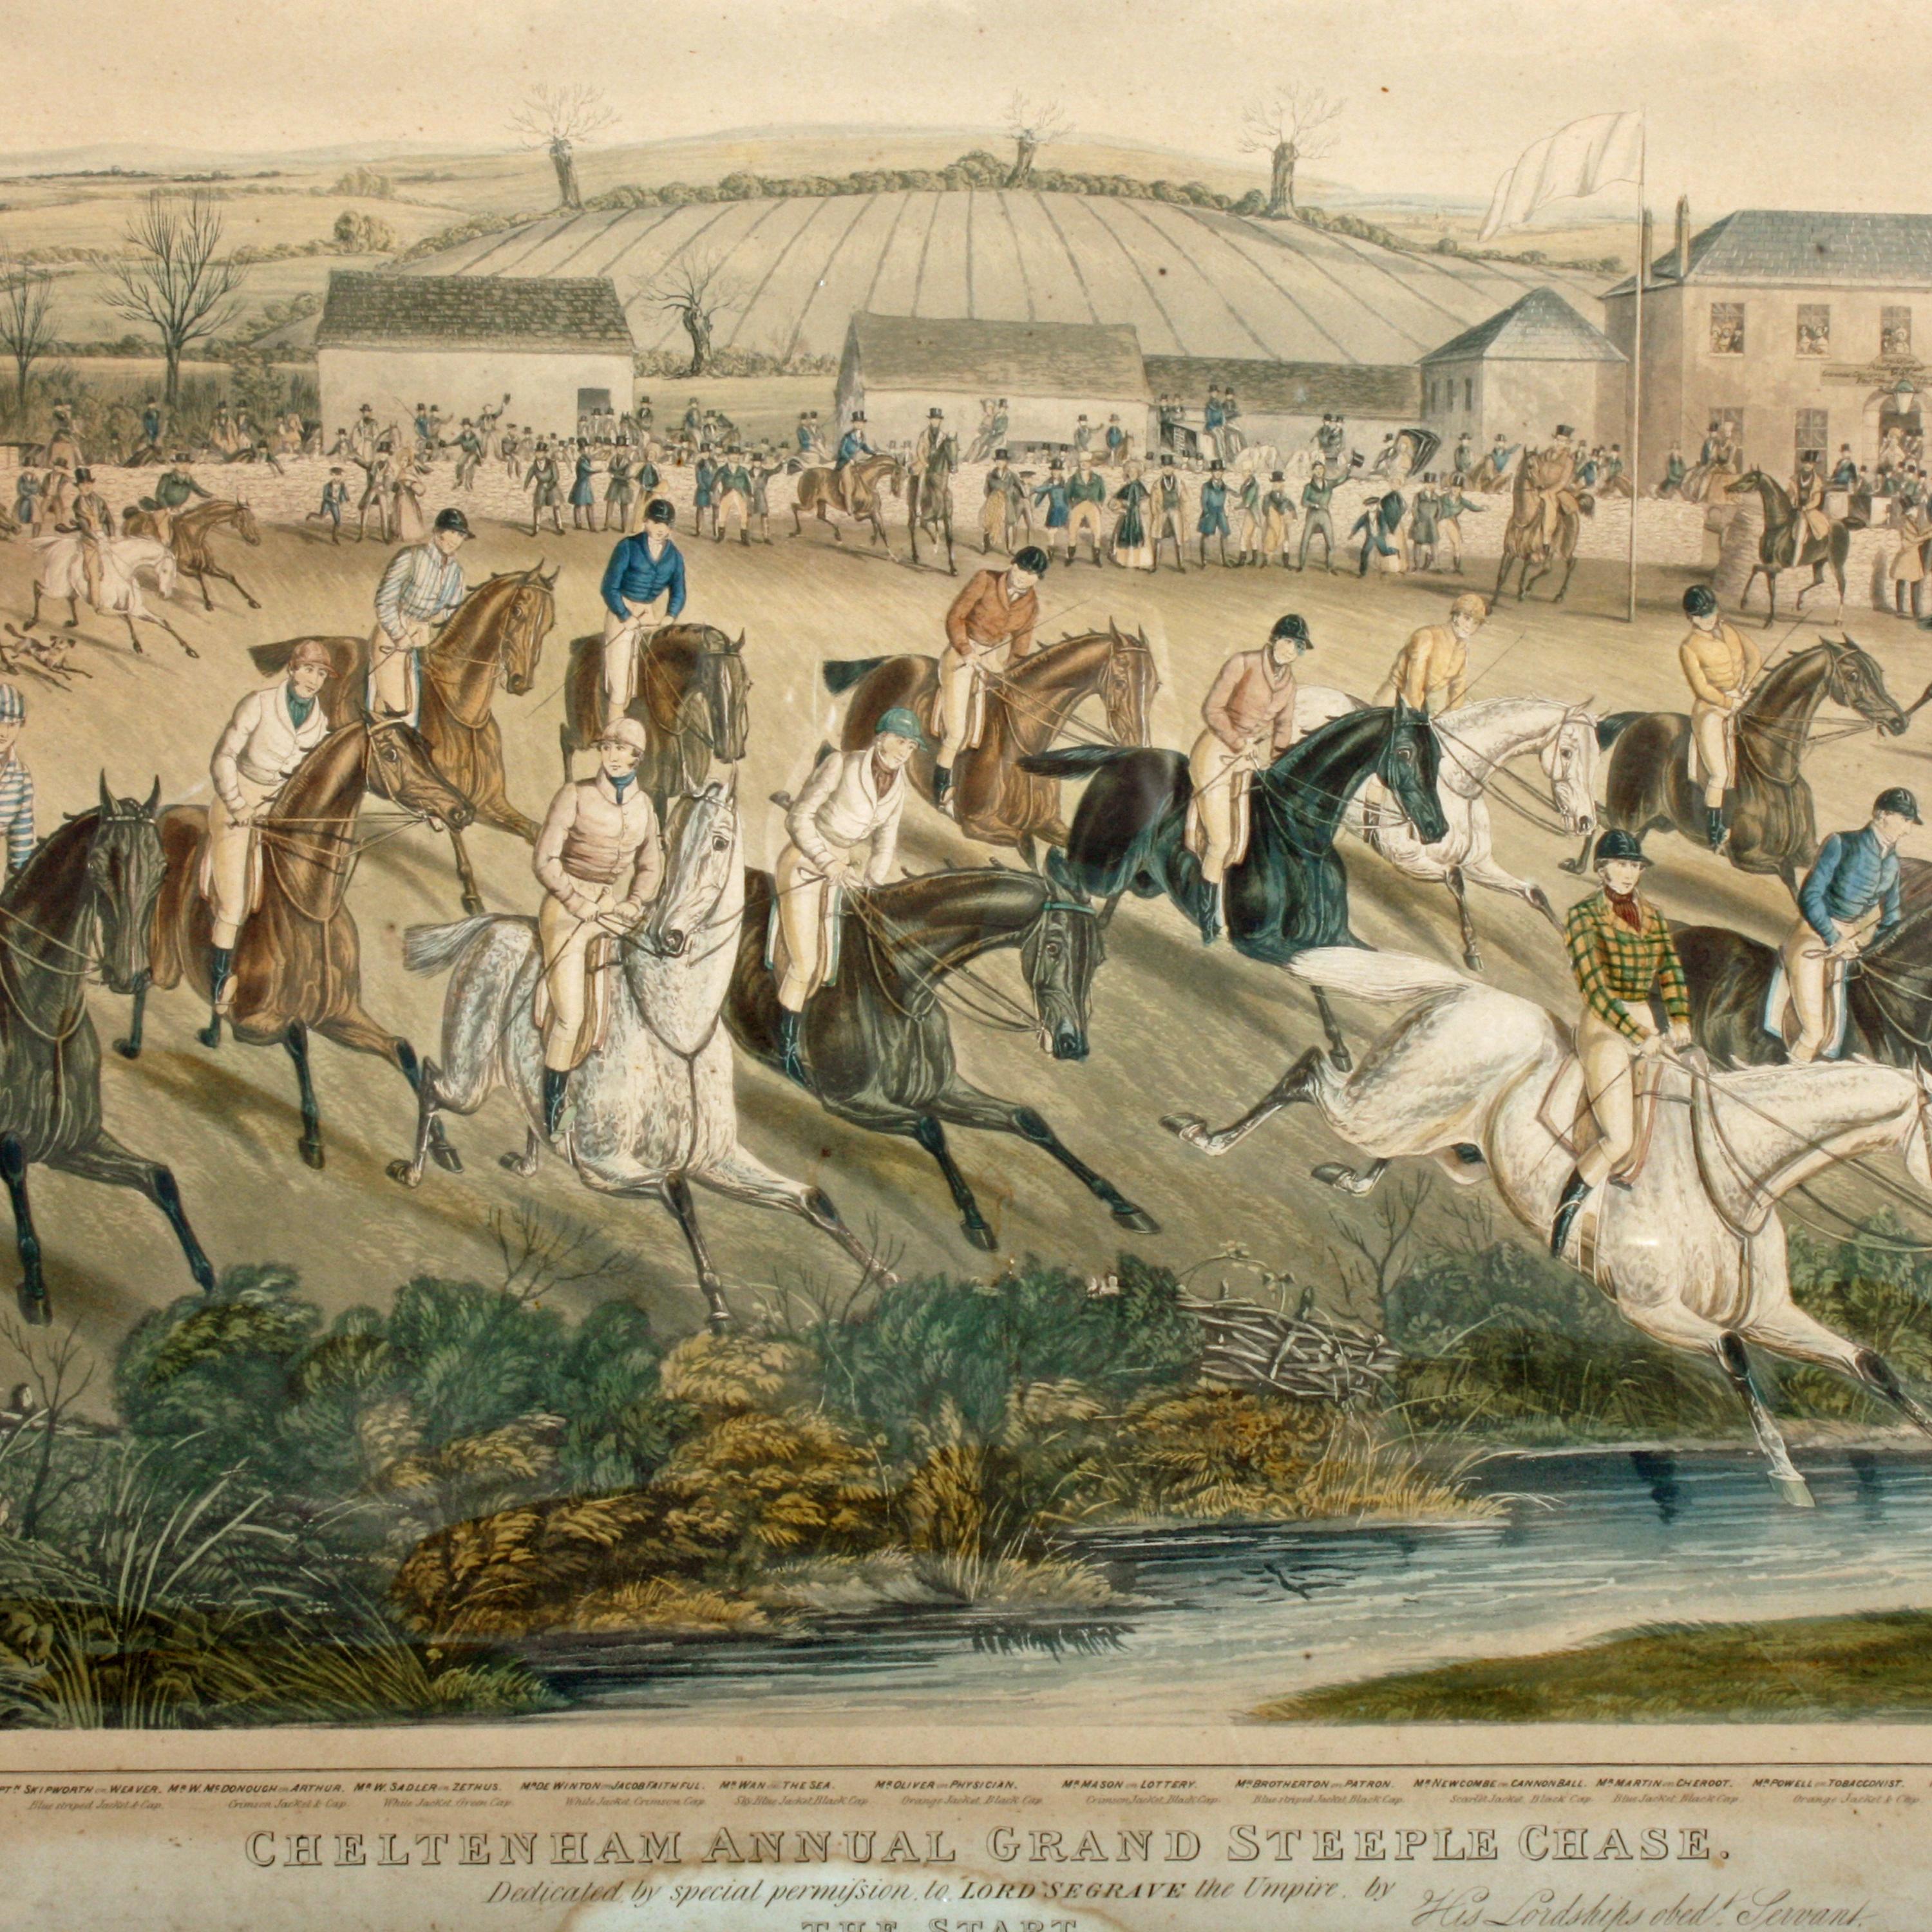 Cheltenham Grand steeple chase etchings


A set of four 19th century early Victorian etchings of the Cheltenham Annual Grand Steeple Chase.

The four etchings are after C. Hunt and published by I.W. Laird in 1841.

The etchings are titled